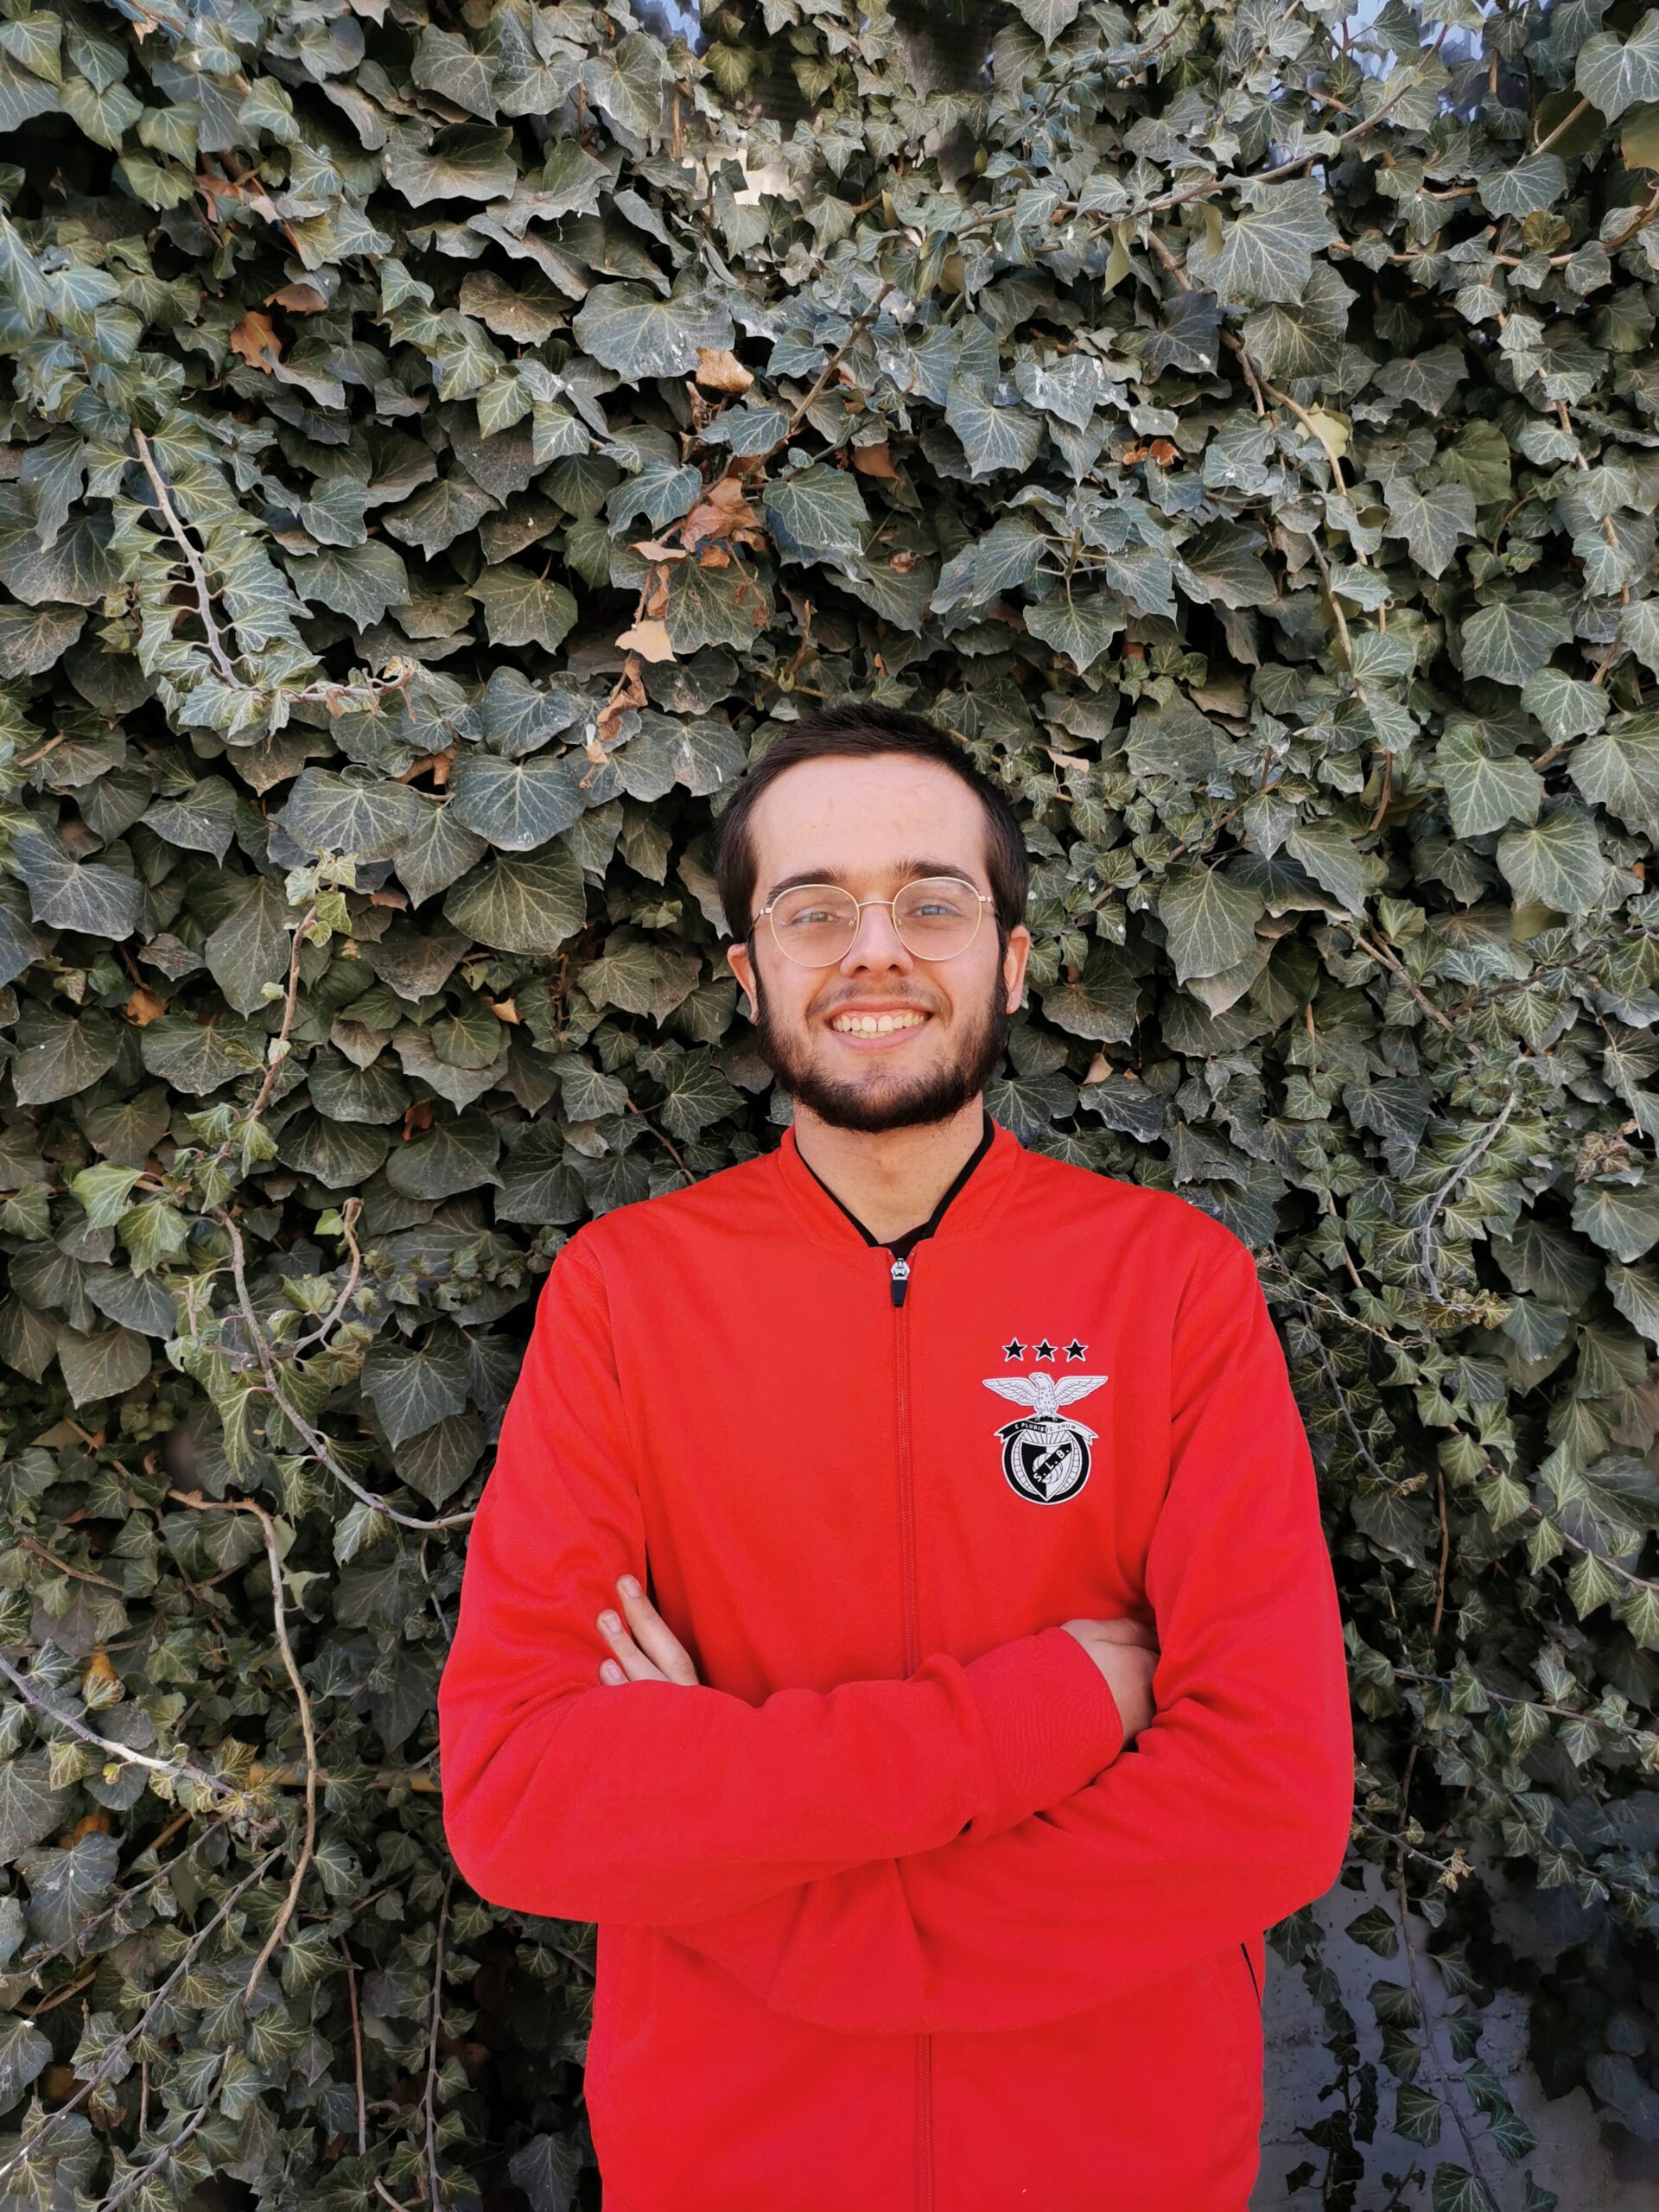 Read more about the article Welcome to José, our new volunteer from Portugal